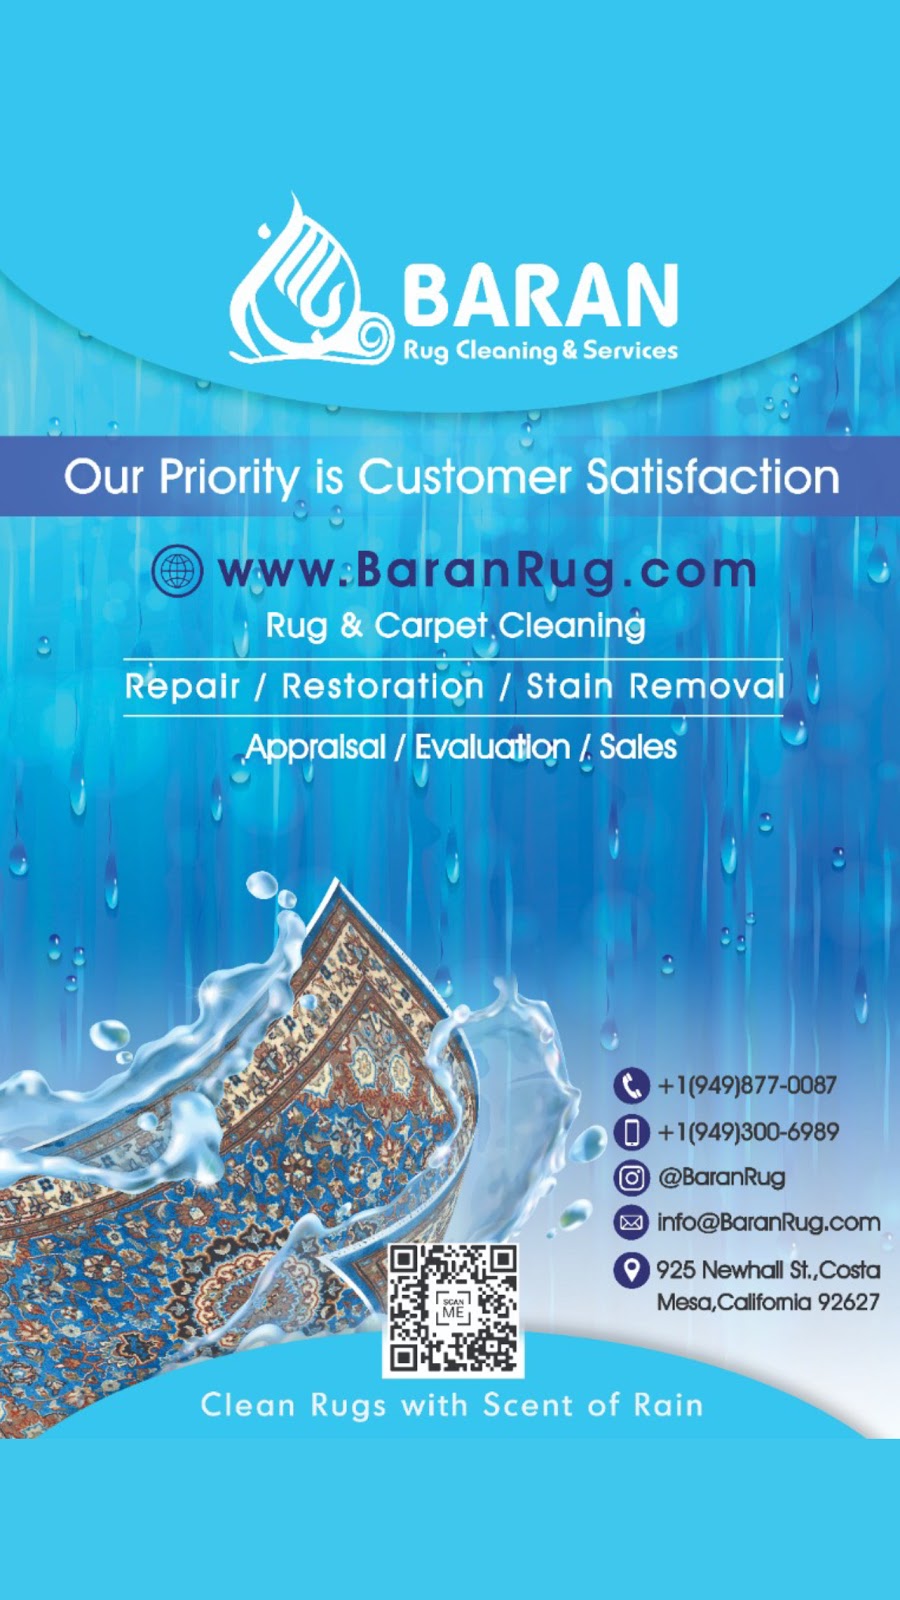 Baran Rug Cleaning & Services | 925 Newhall St, Costa Mesa, CA 92627 | Phone: (949) 300-6989